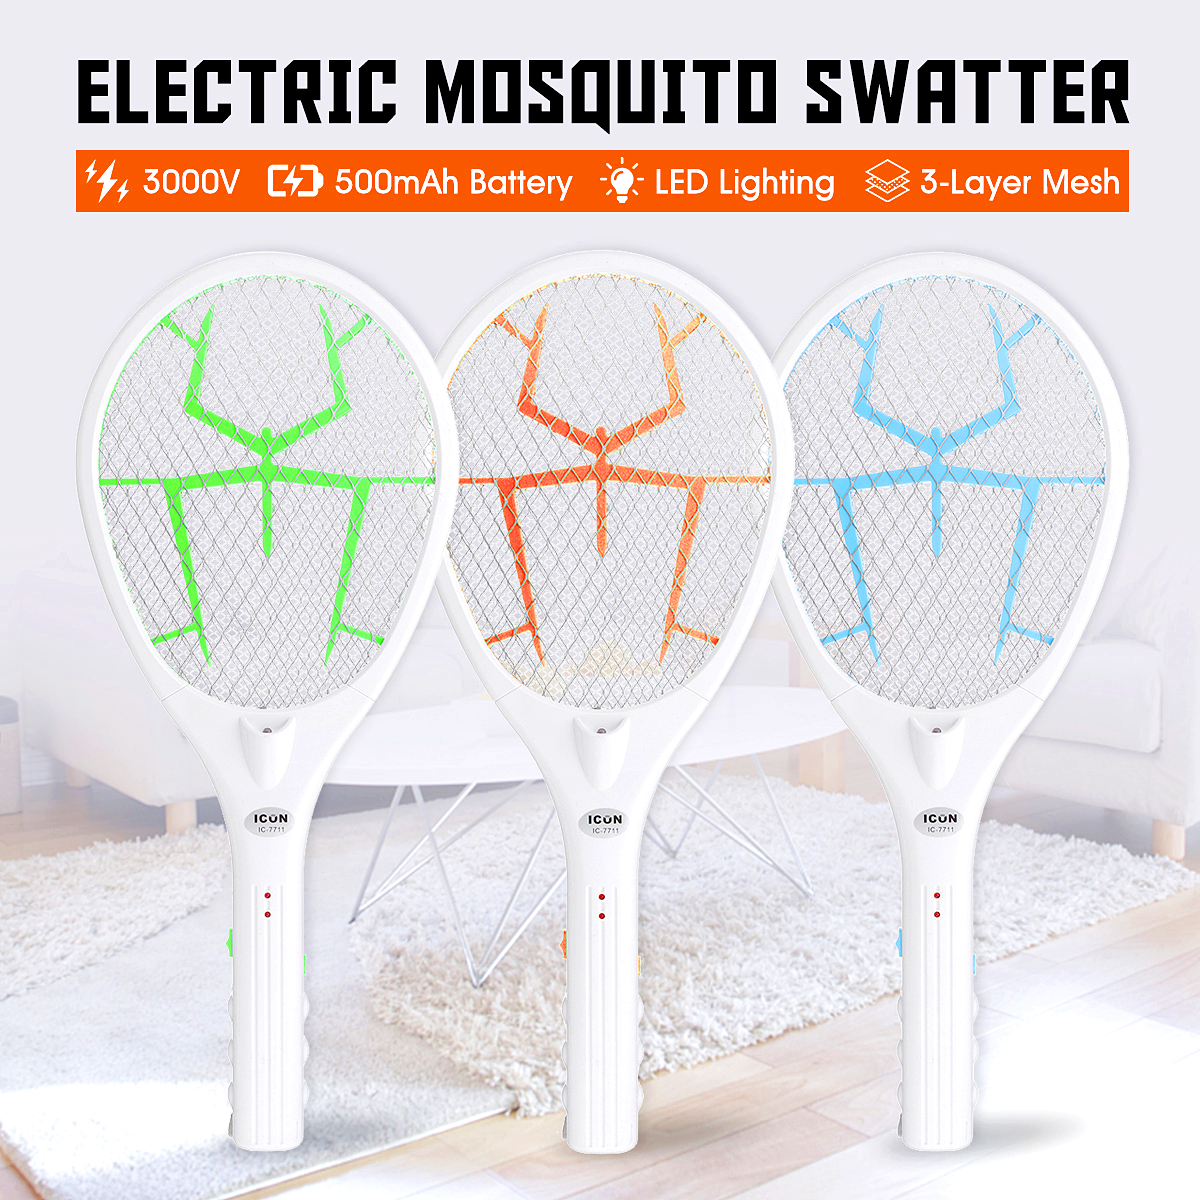 USB-Electric-Bug-Zapper-Fly-Swatter-Zap-Mosquito-Pests-Control-Mosquito-Swatter-Killer-1533101-1